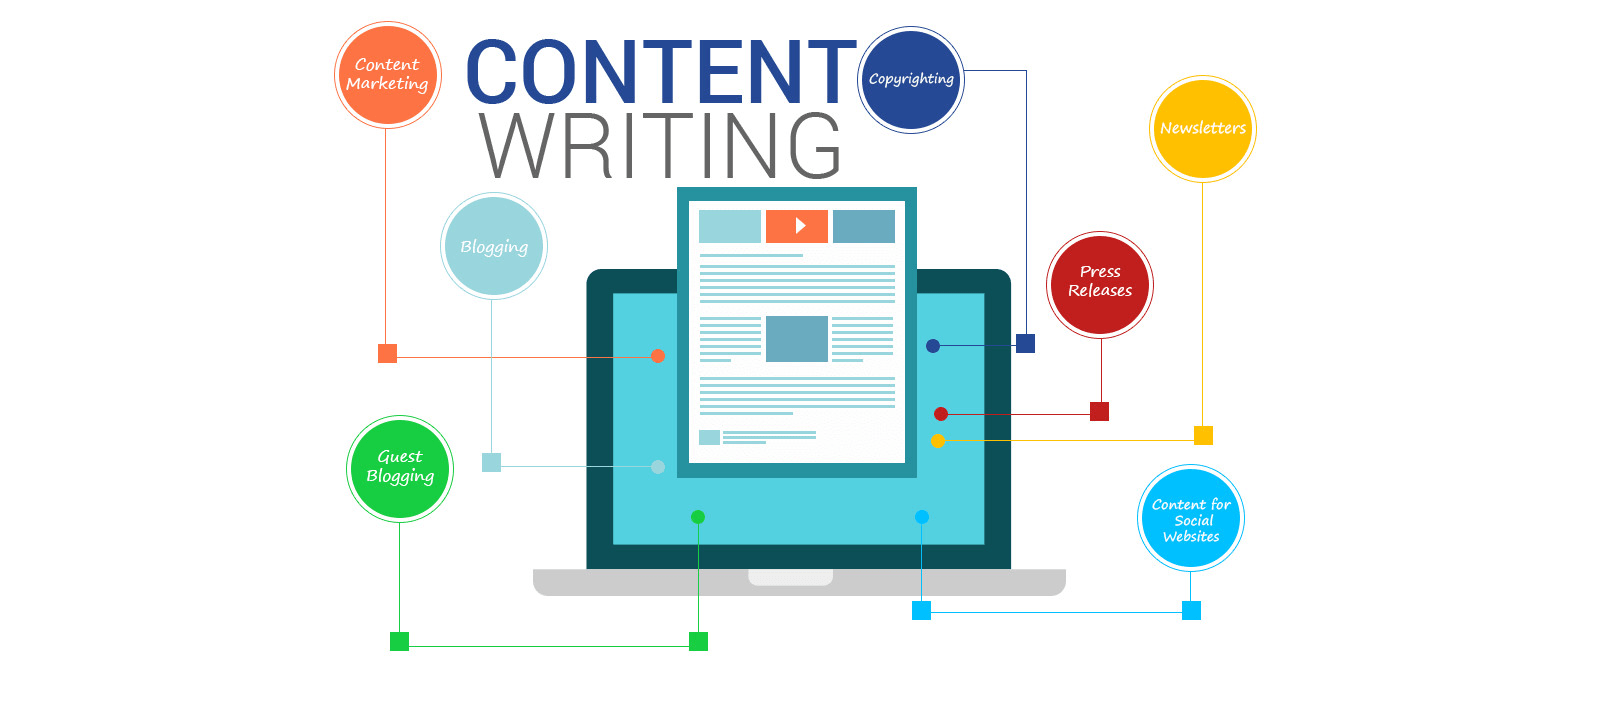 Write high quality content for your business and websites by